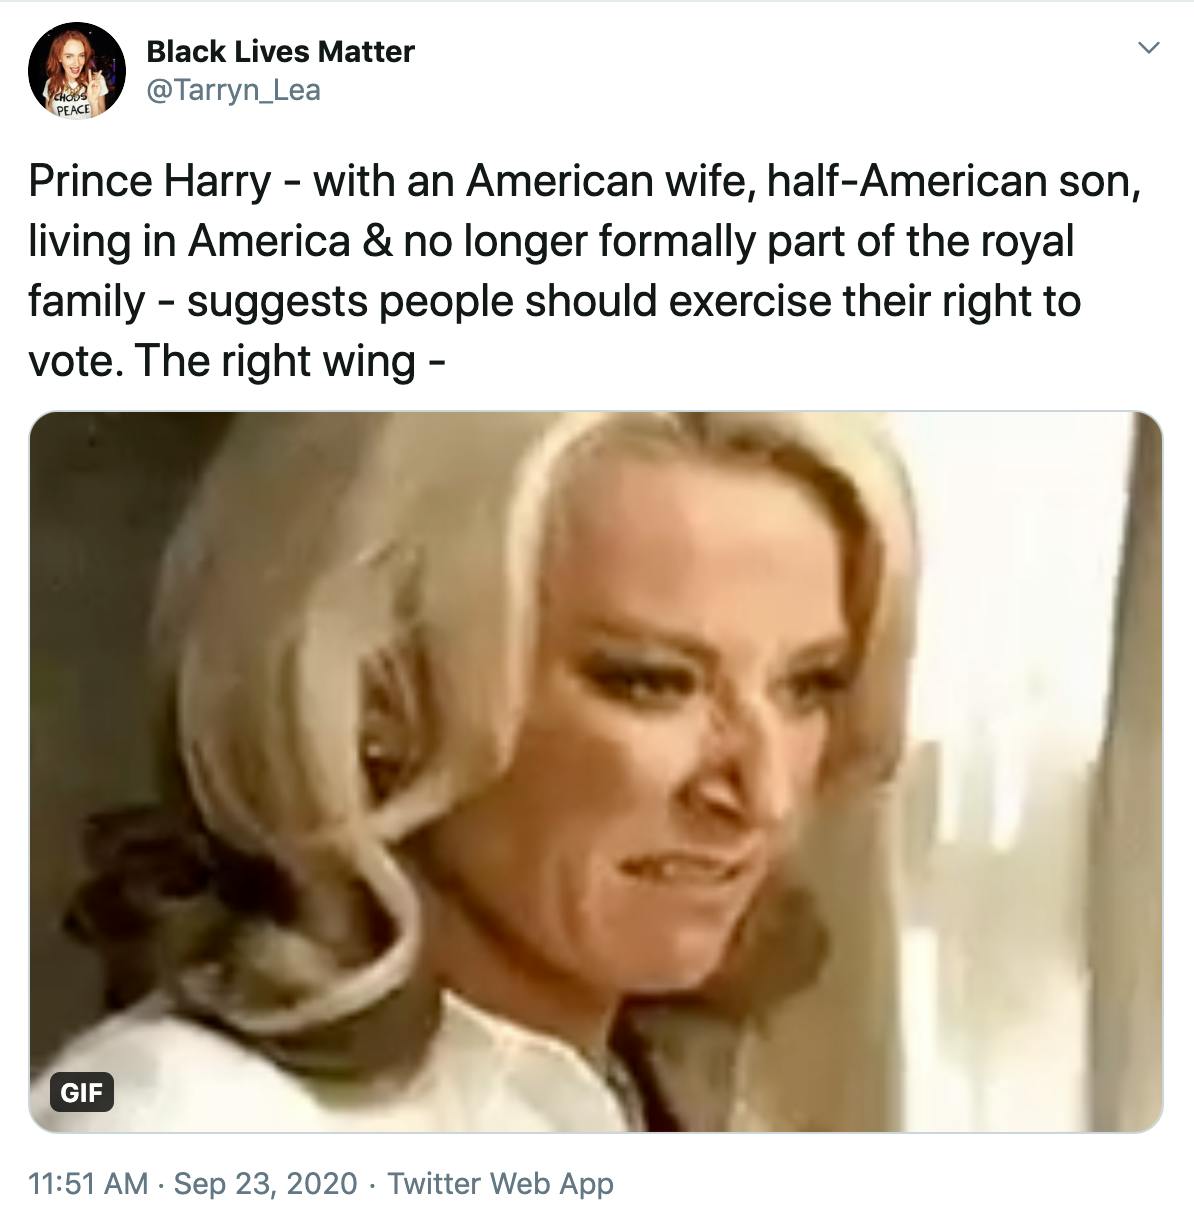 "Prince Harry - with an American wife, half-American son, living in America & no longer formally part of the royal family - suggests people should exercise their right to vote. The right wing -" gif of blonde woman smashing things